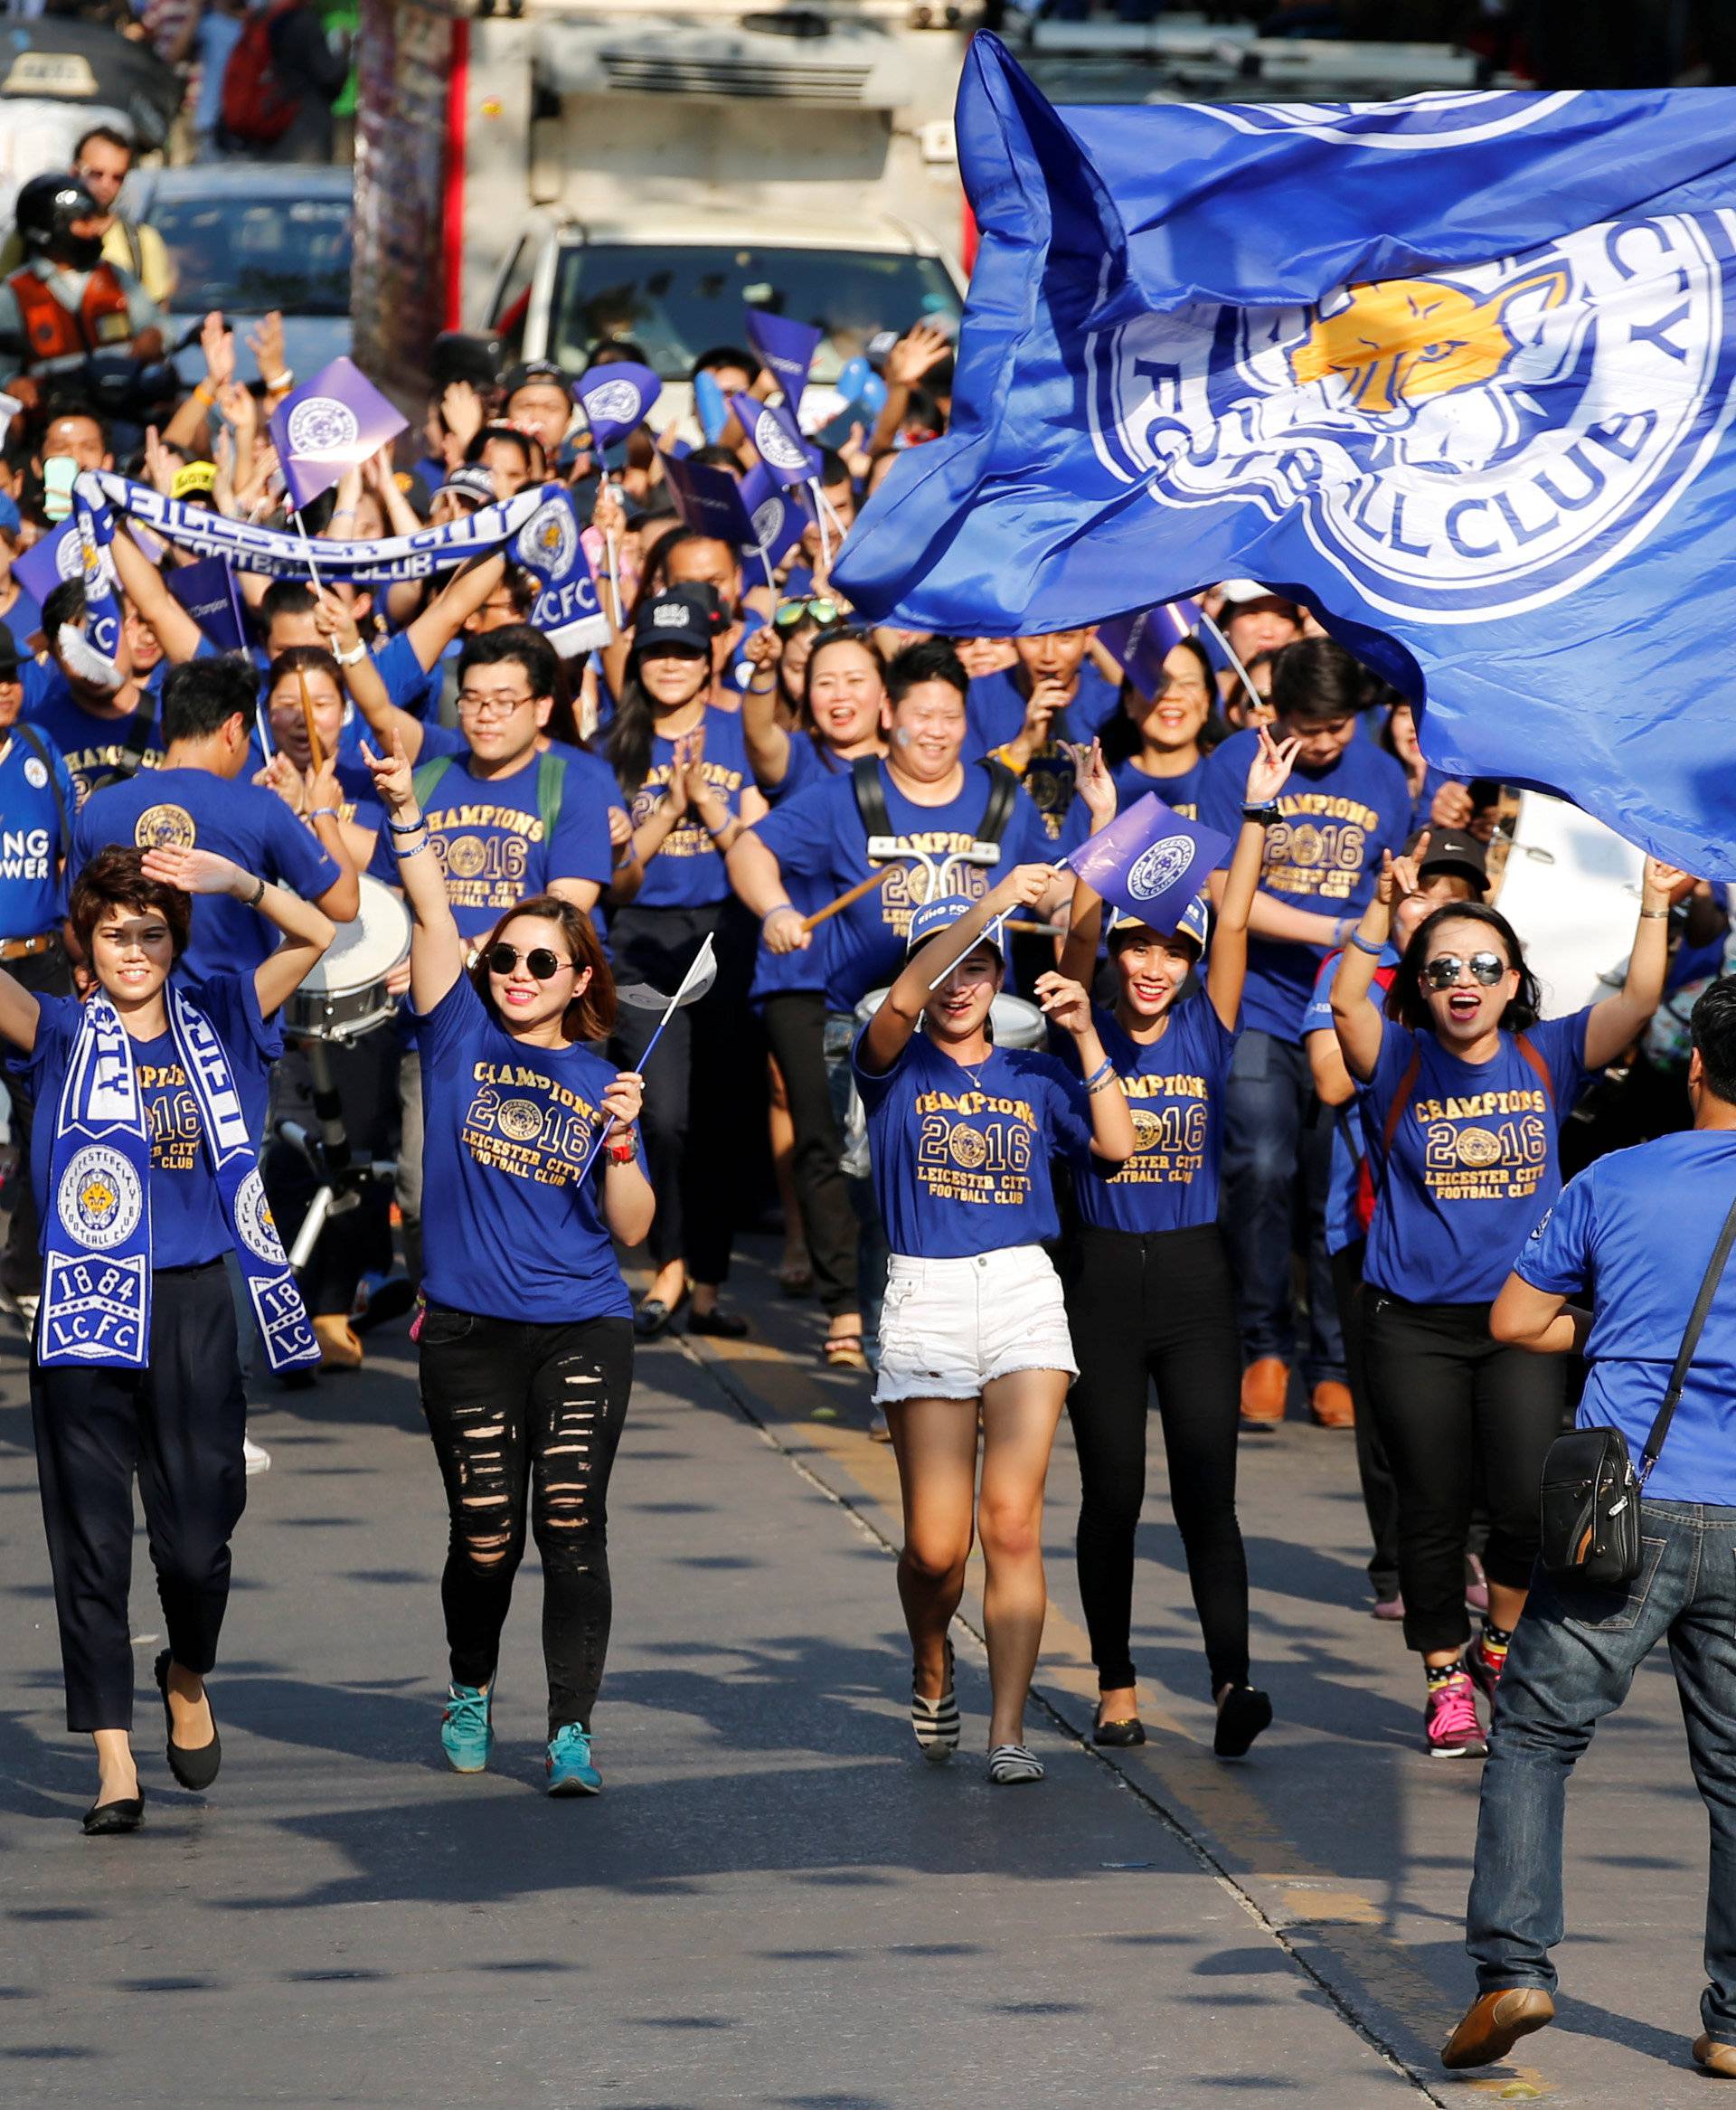 Leicester City soccer club's fans take part in a parade to celebrate club's English Premier League title in Bangkok